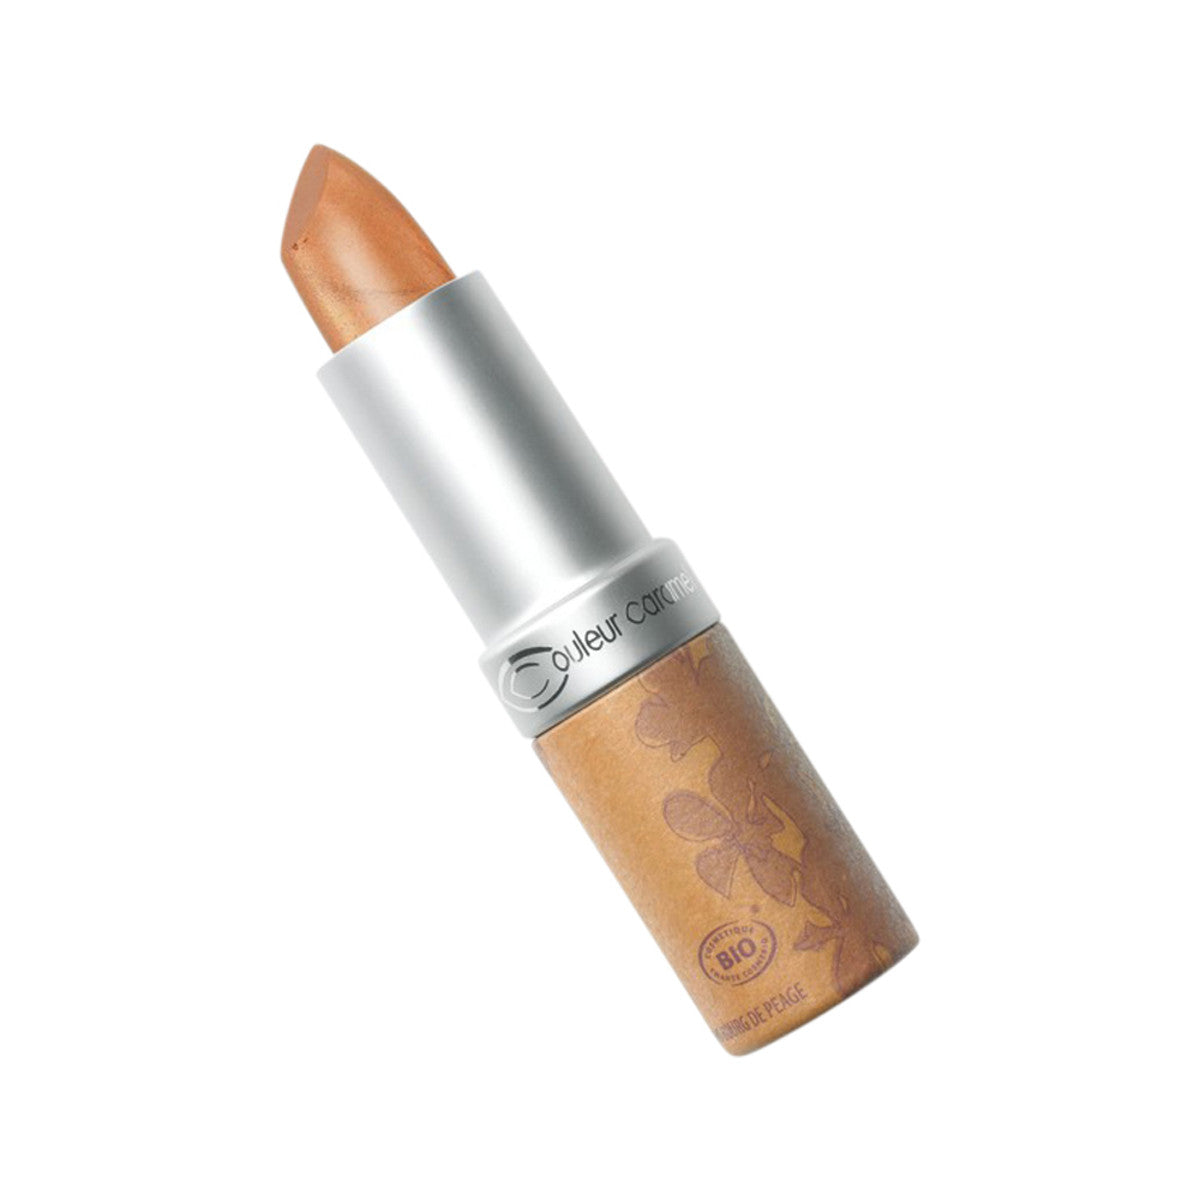 Couleur Caramel - Lipstick Pearly Light Copper (218)